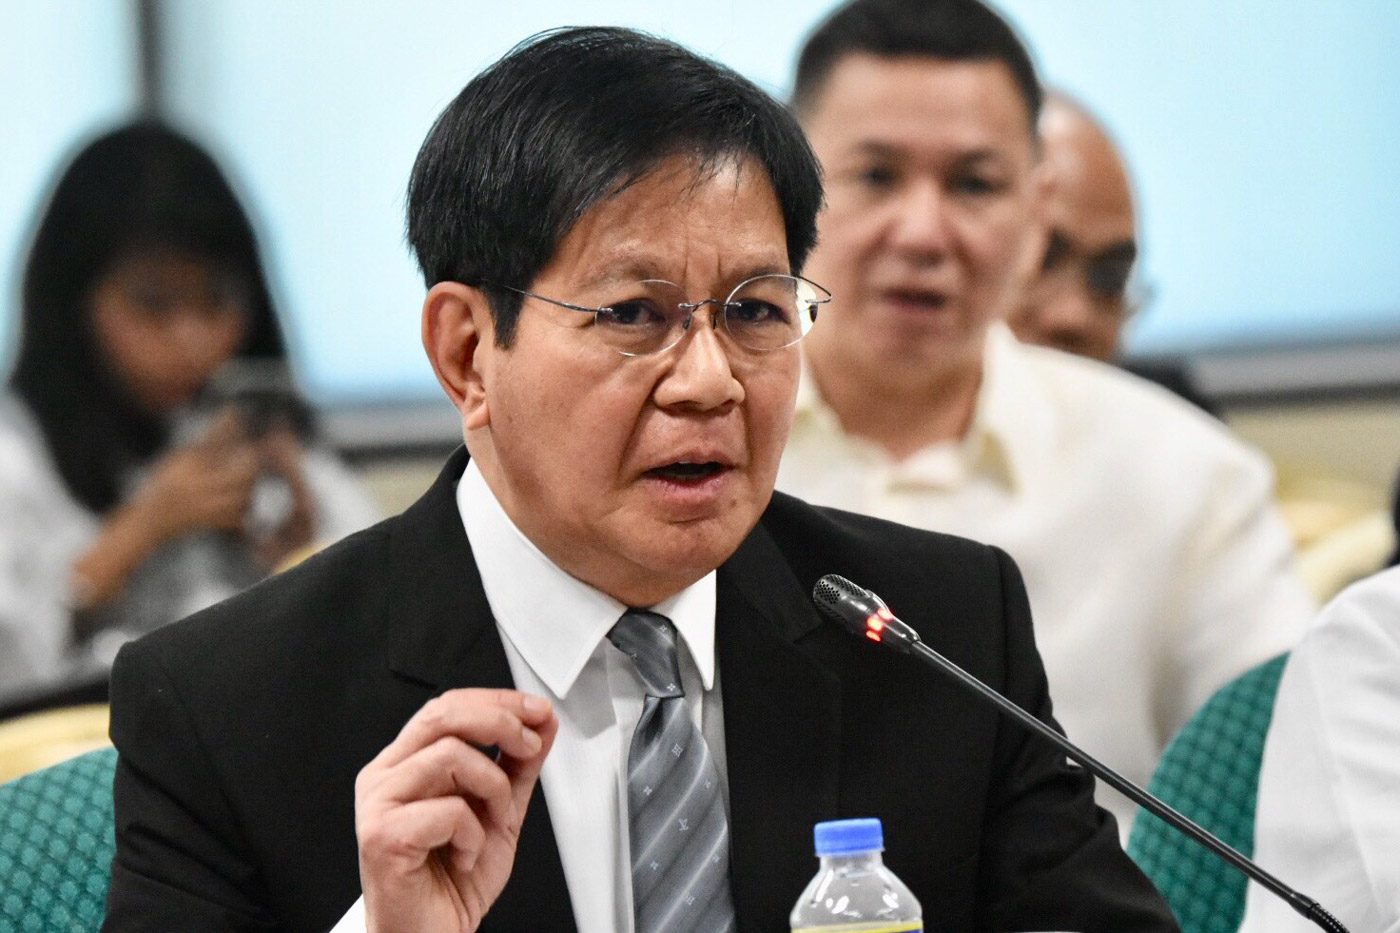 Lacson on budget standoff: It’s all about pork barrel